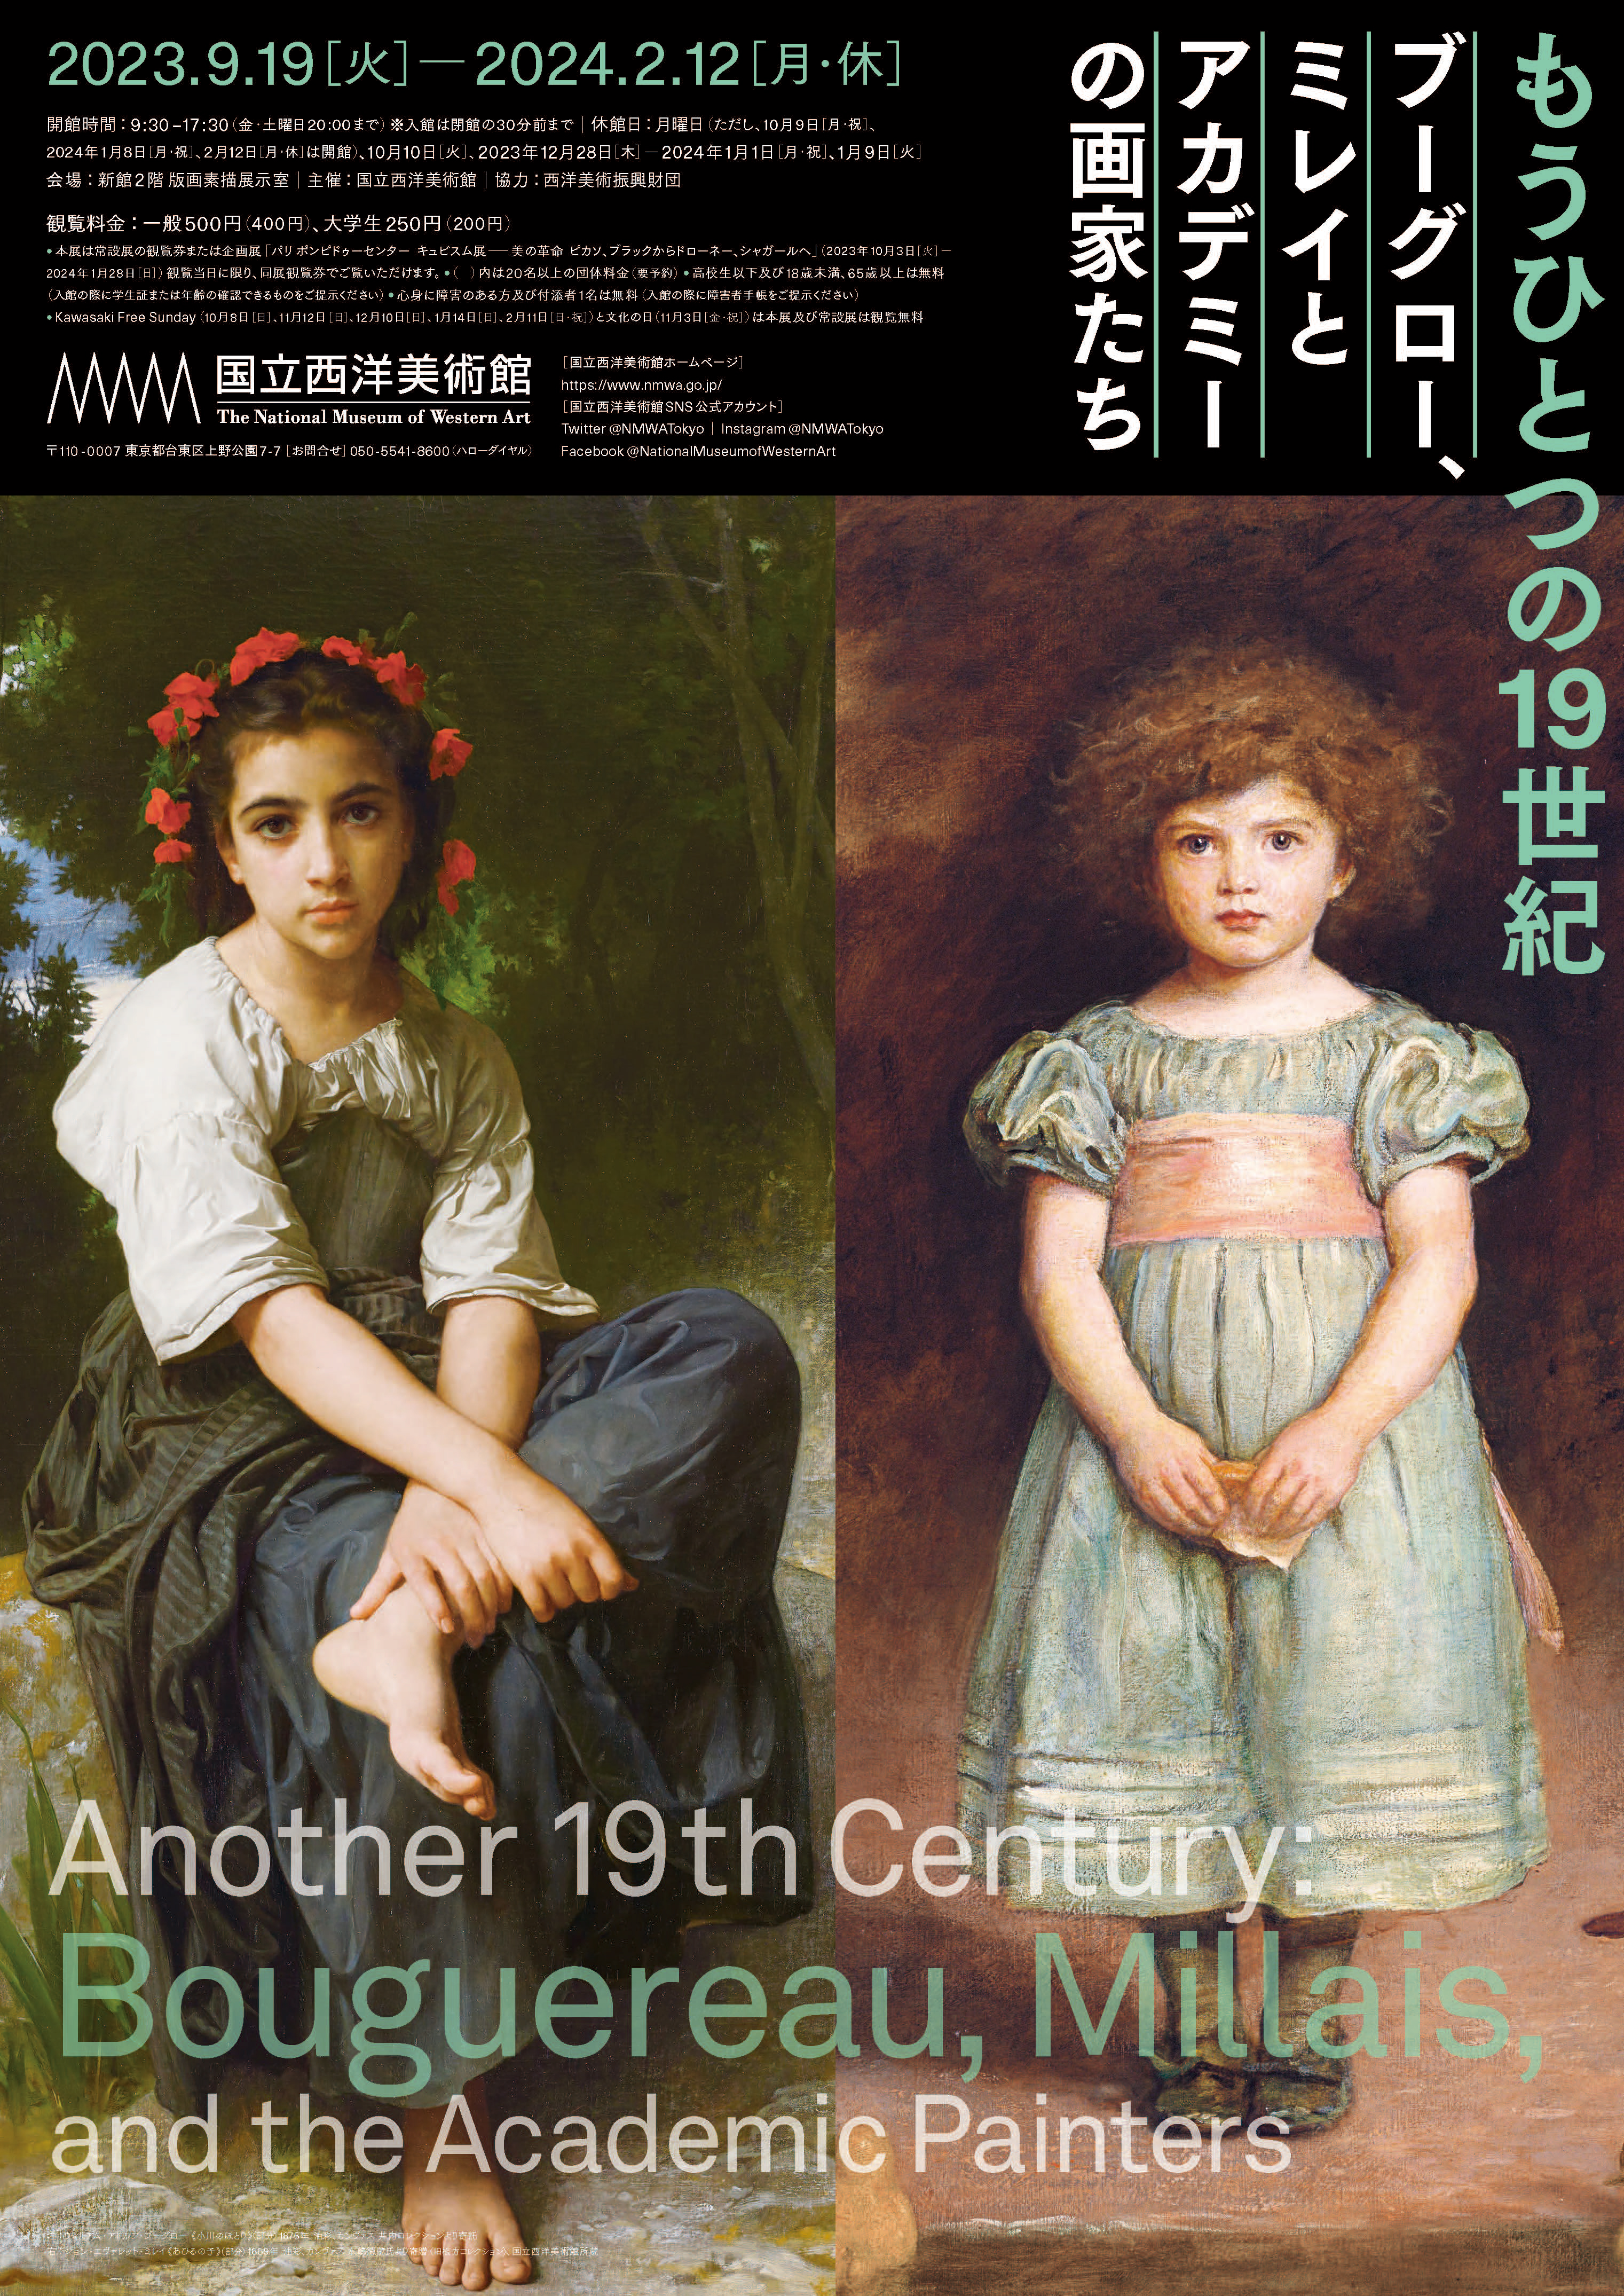 Another 19th Century: Bouguereau, Millais, and the Academic